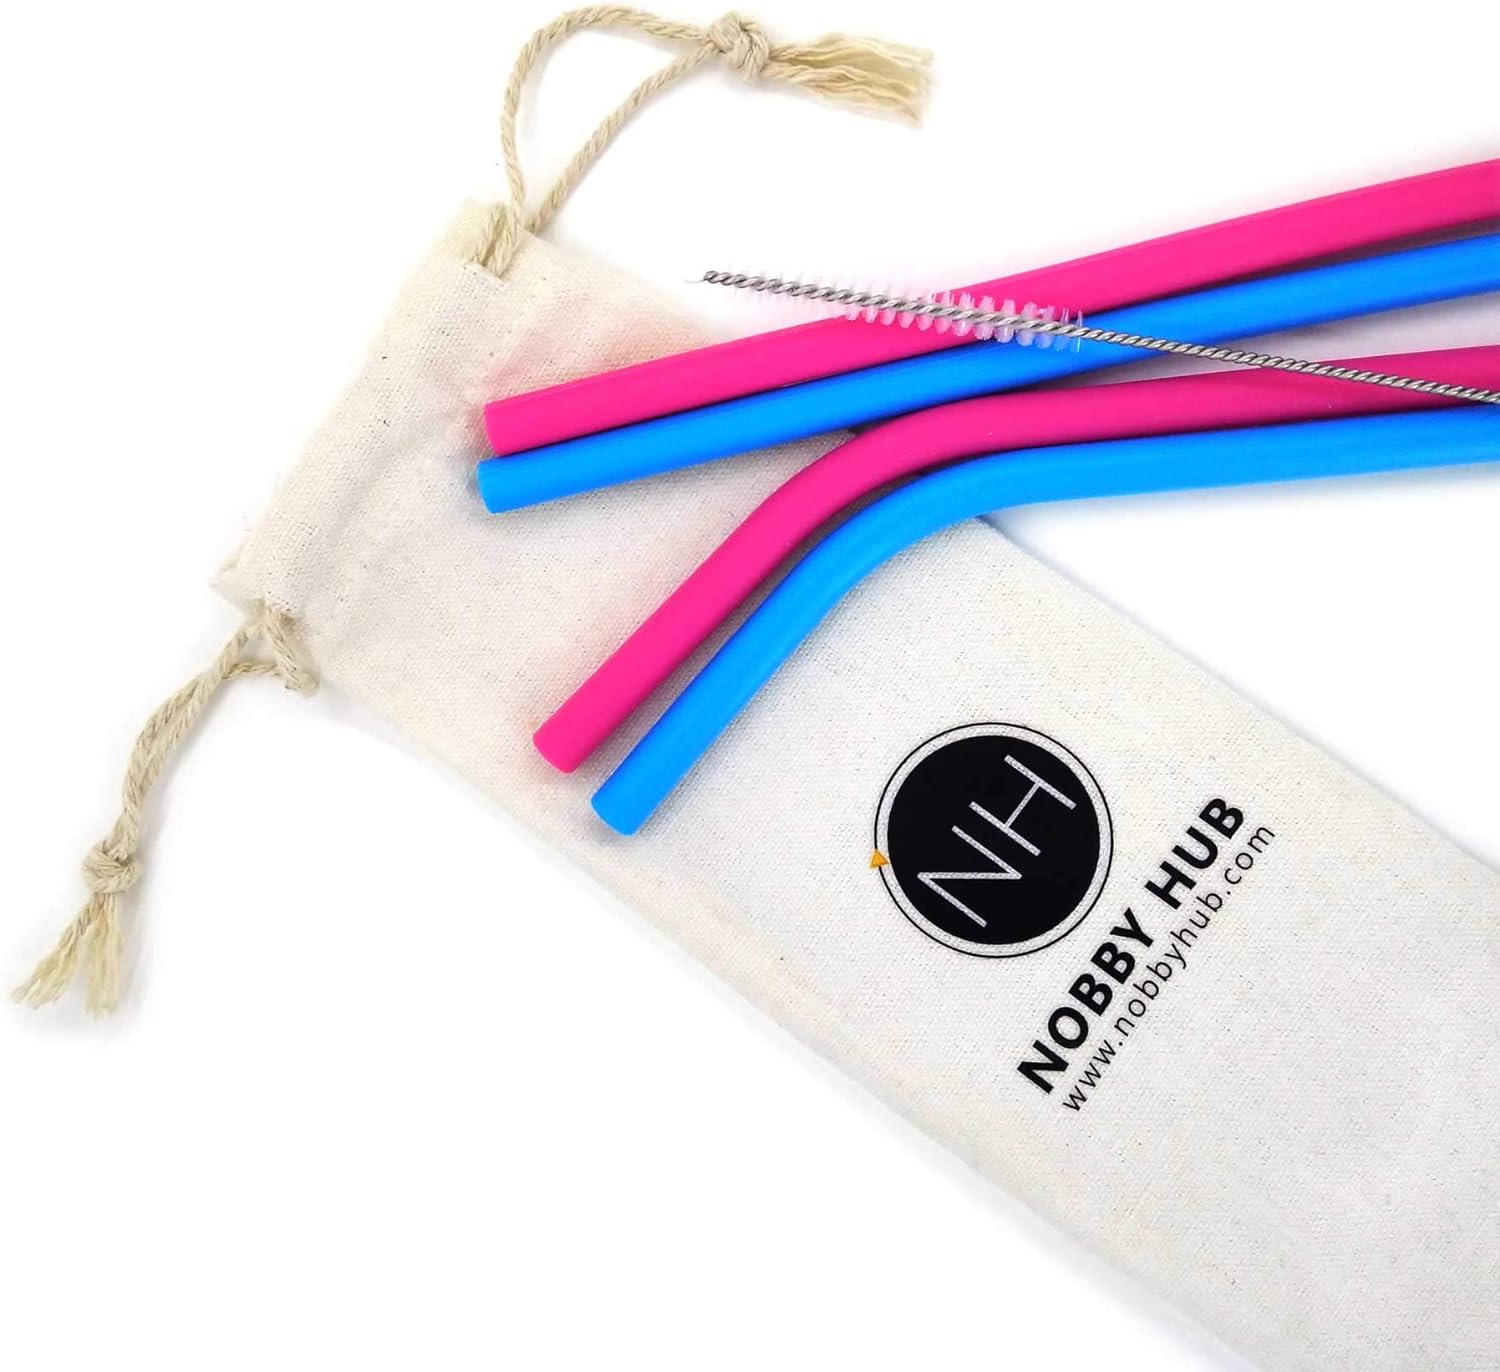 Reusable Silicone Drinking Straw by Nobby Hub